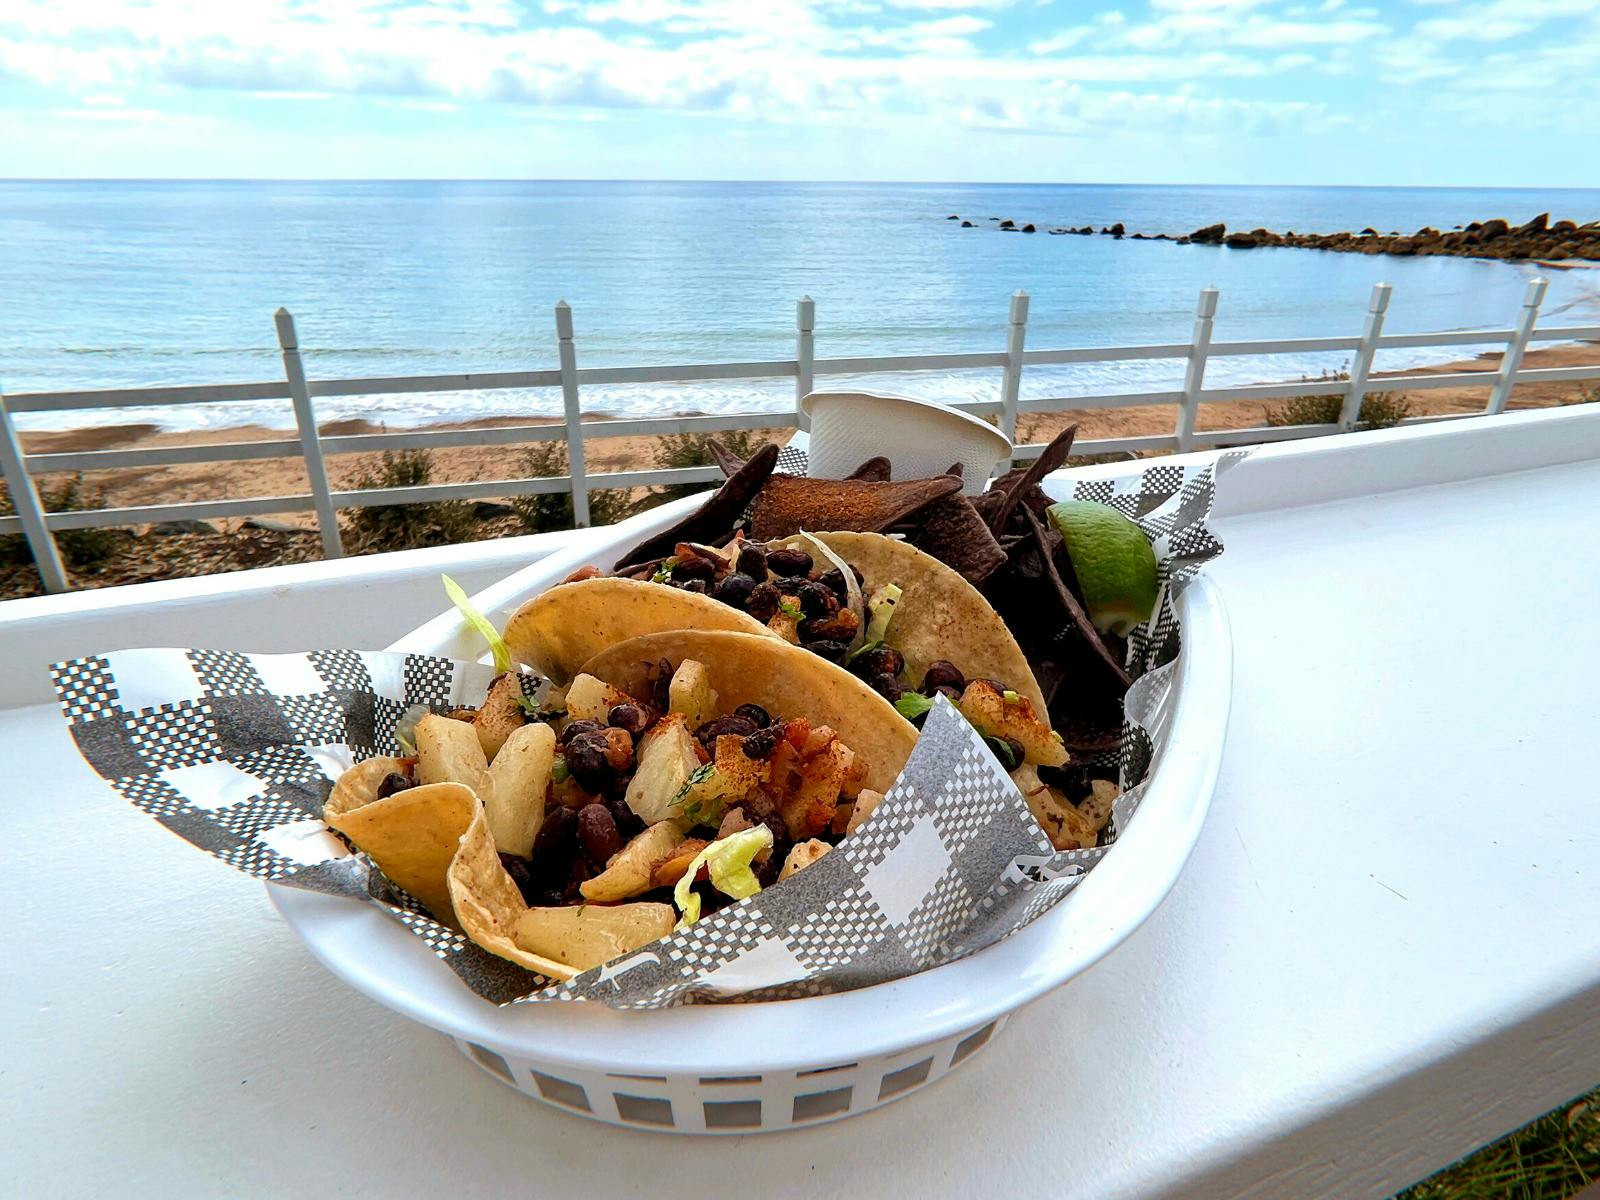 Tacos with a seaside view